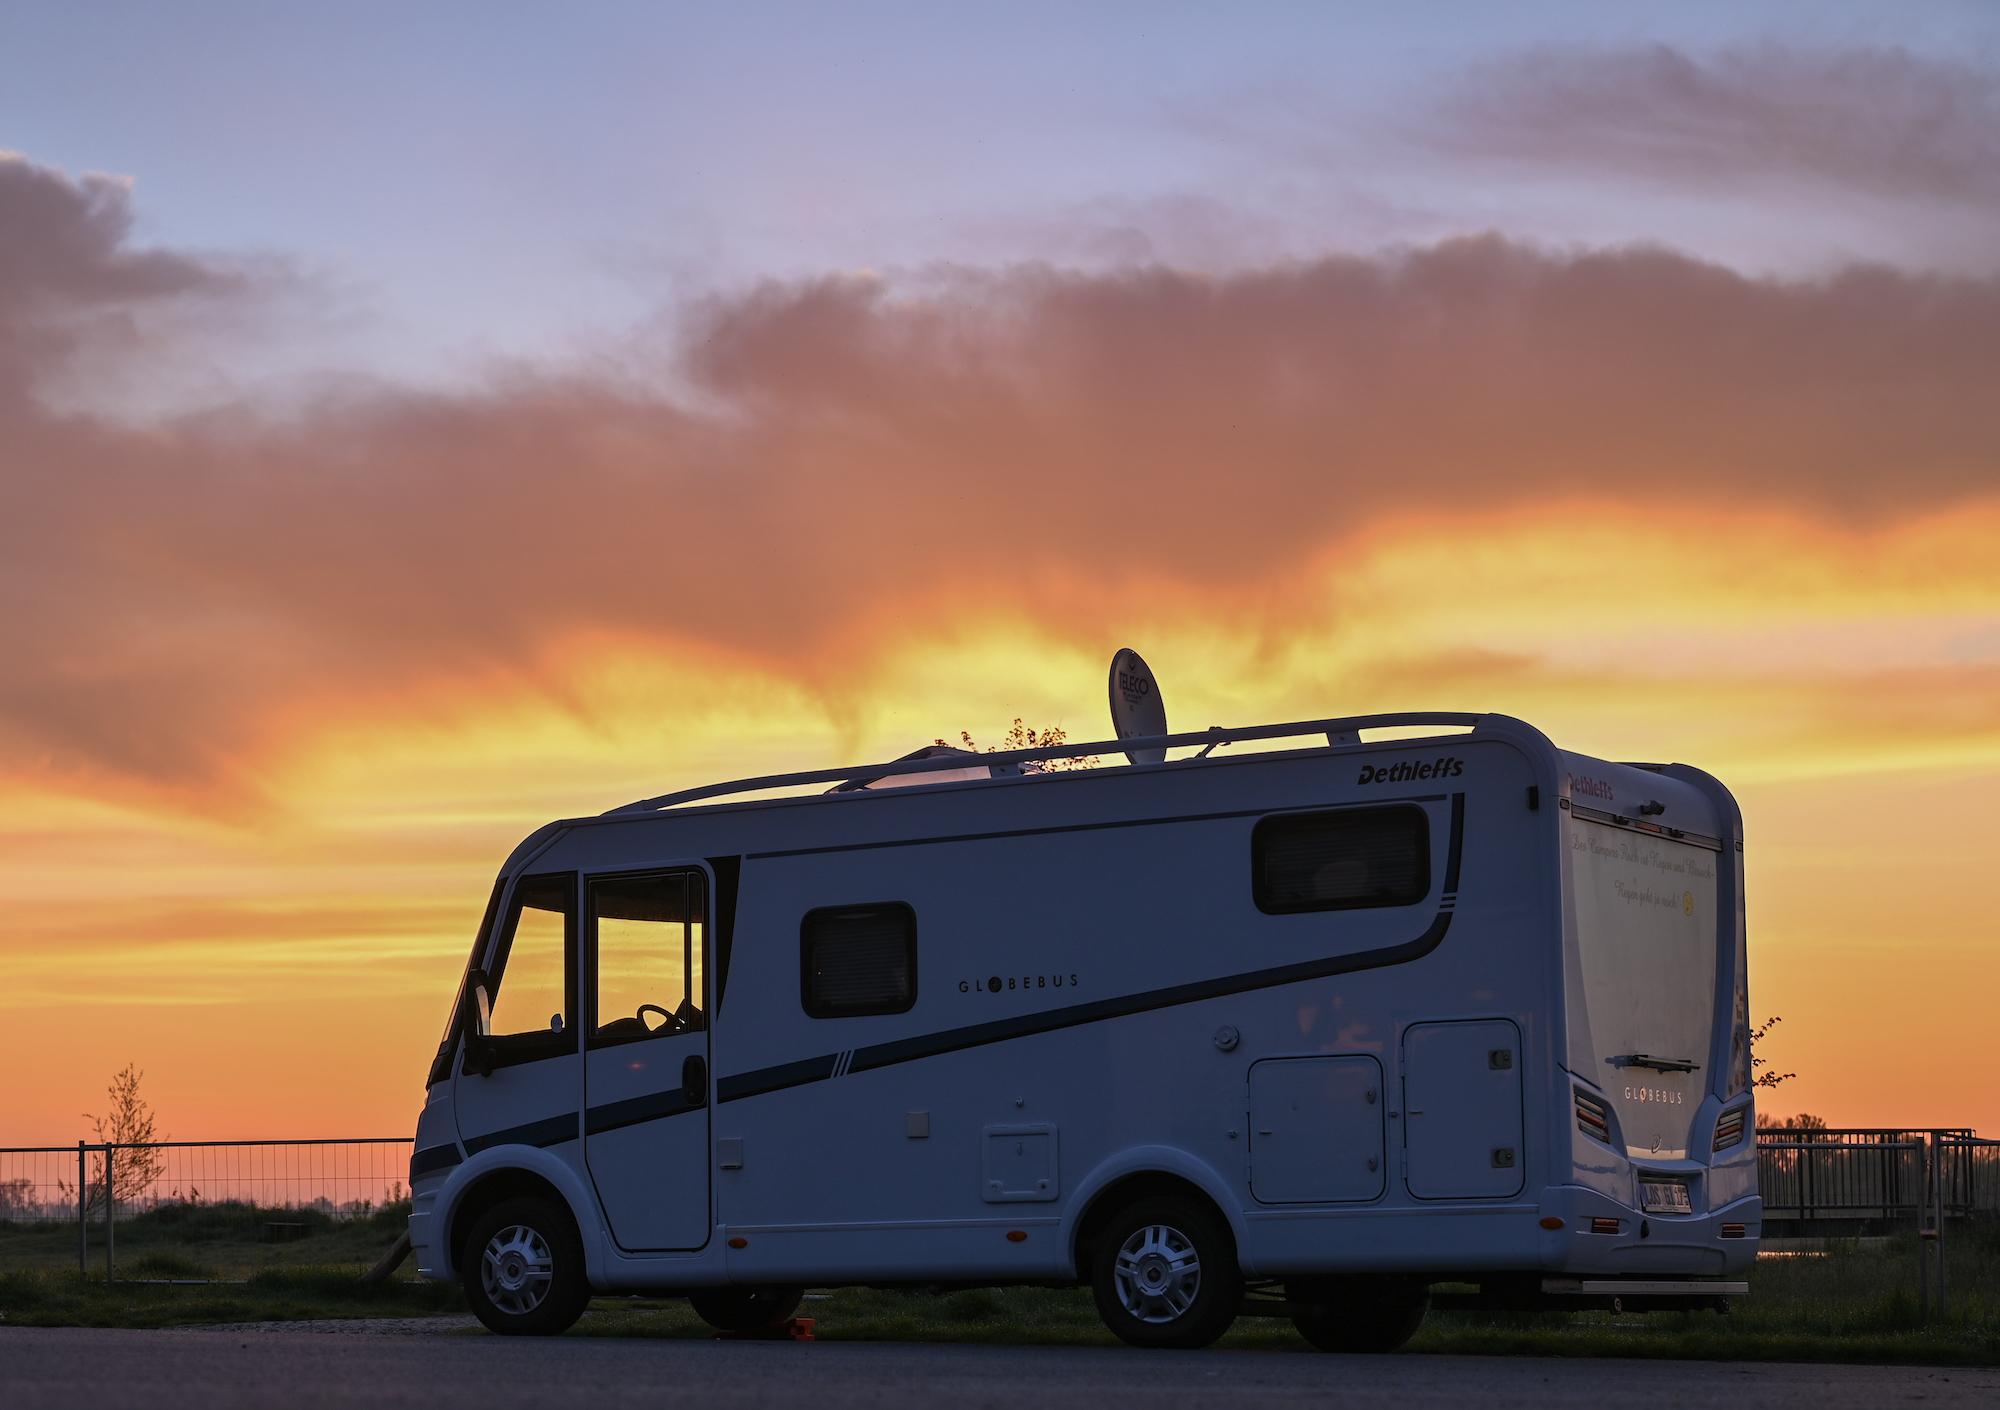 The sun rises behind a parked RV motorhome